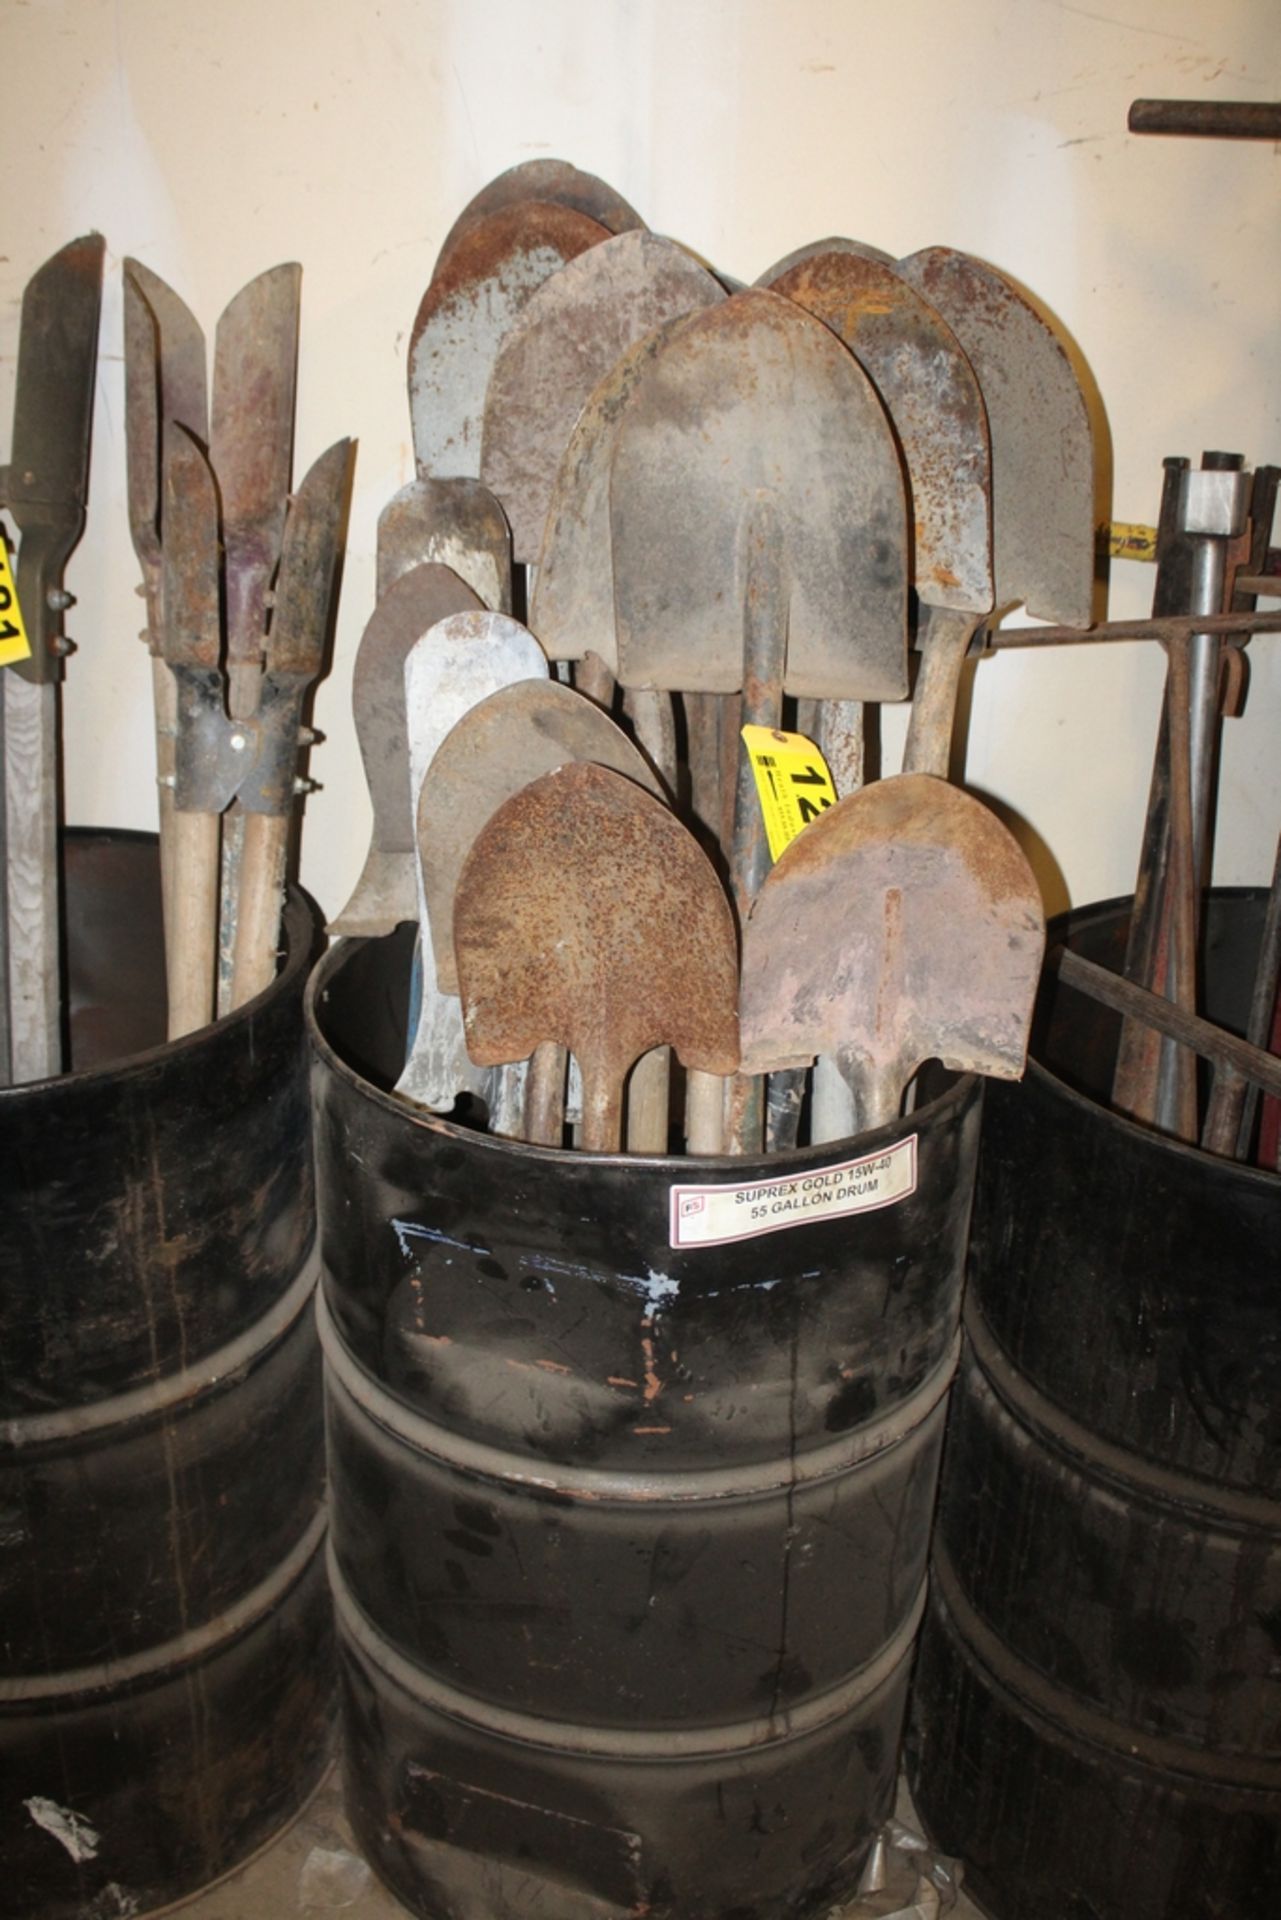 LARGE QTY OF SHOVELS IN DRUM WITH DRUM